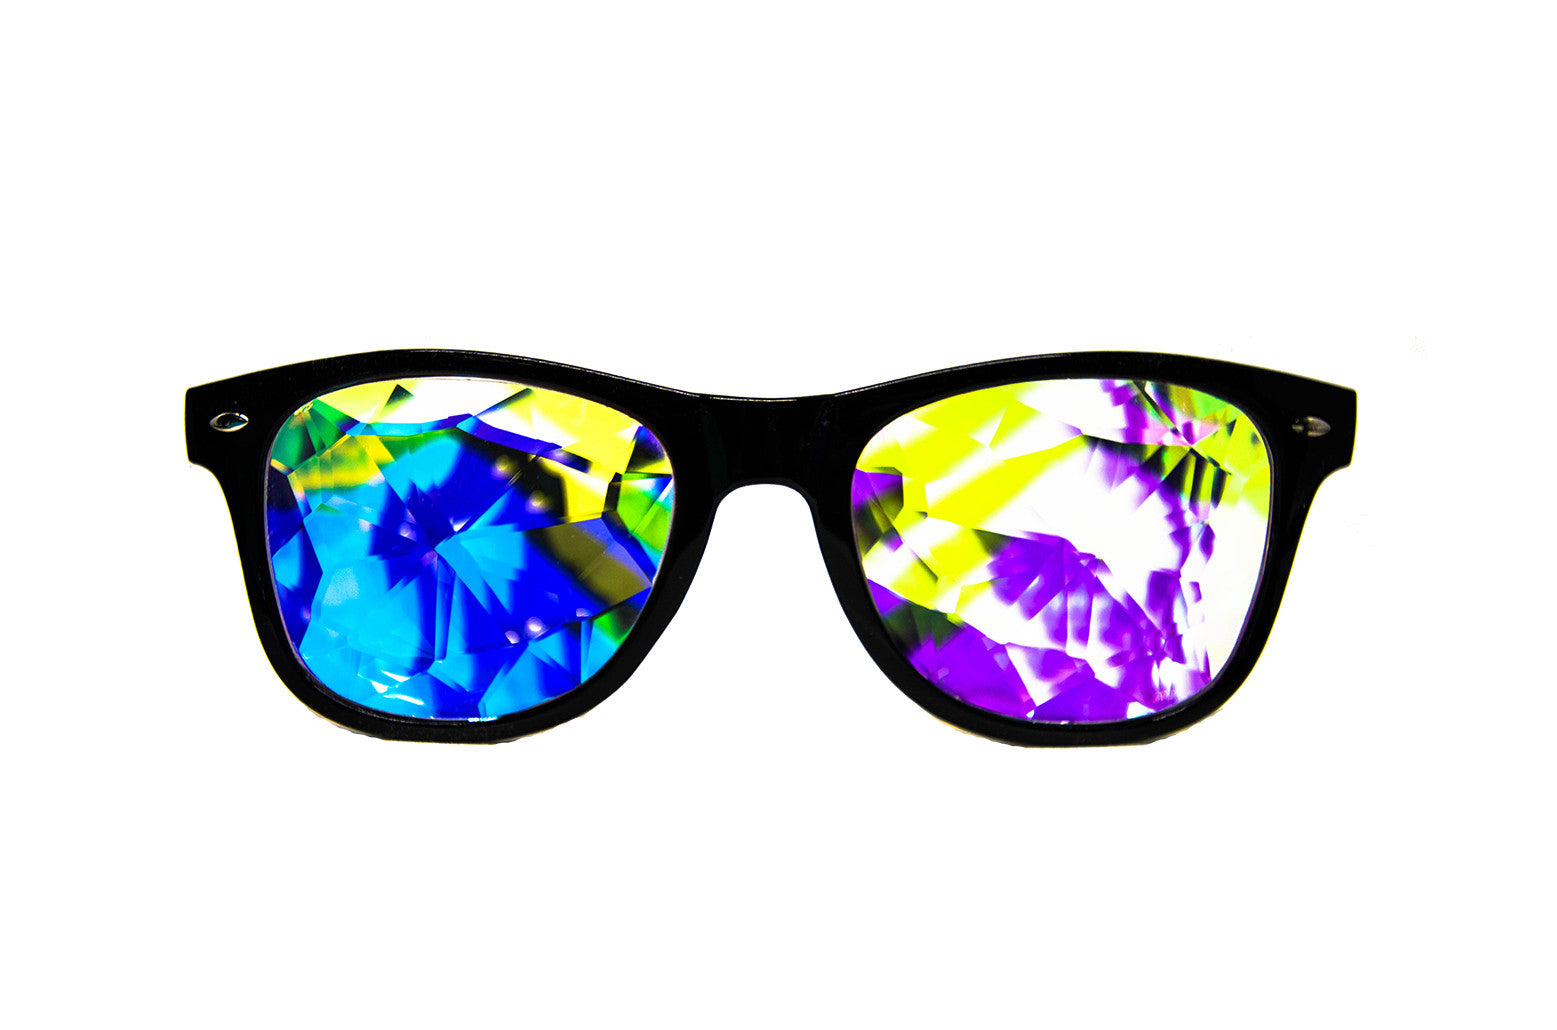 Intense Crystal Rainbow Kaleidoscope Effect rainbow crystal lens Sunglasses Women Men Party Festival  Glasses at SuperFried's Festival Accessories and Sunglasses Online store